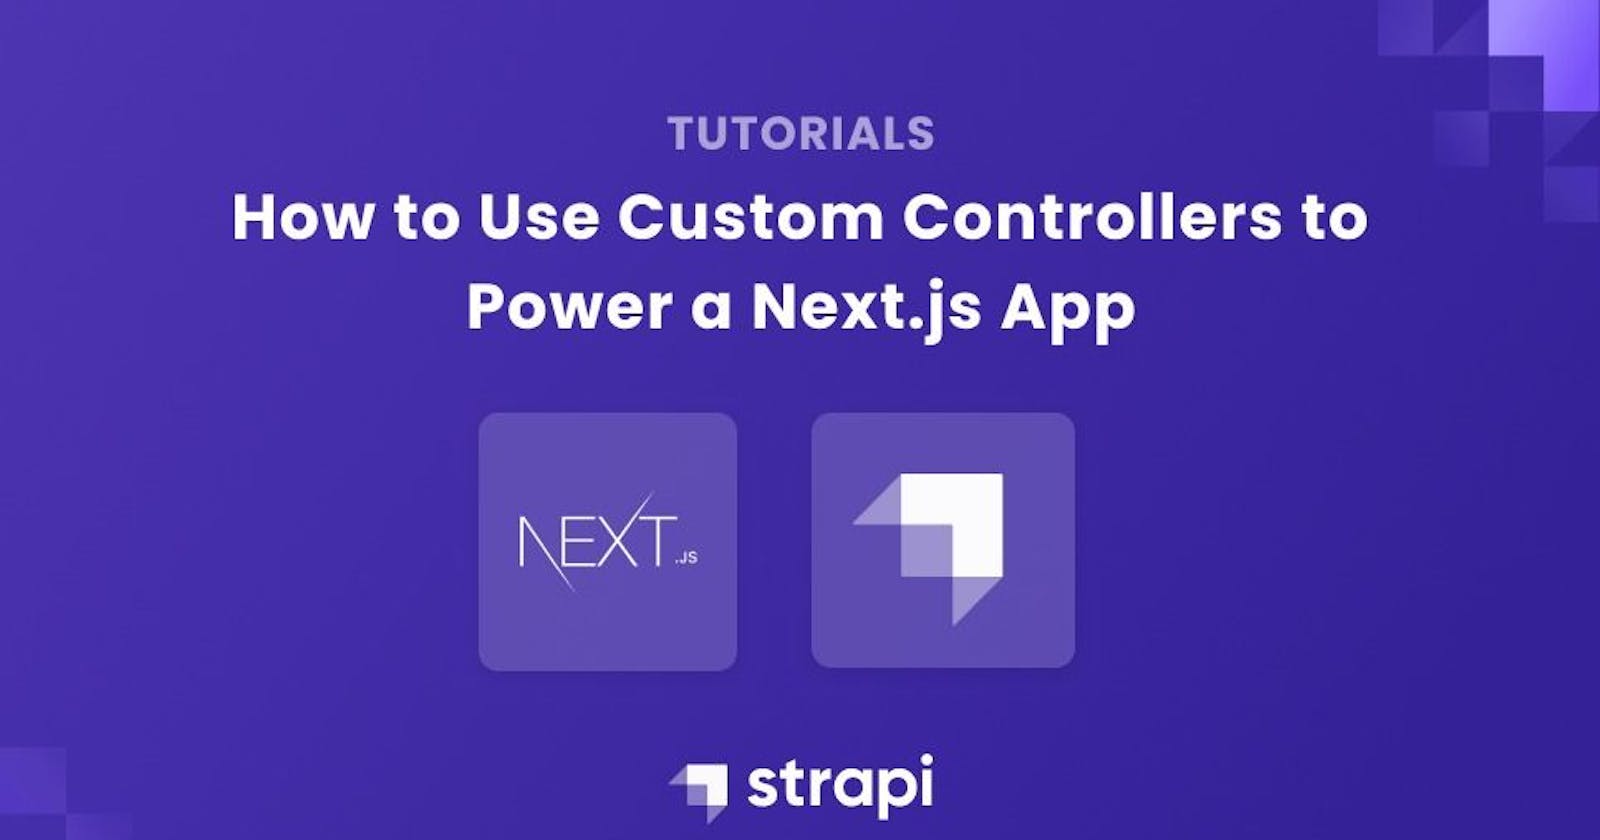 Using Custom Controllers in Strapi to Power a Next.js App